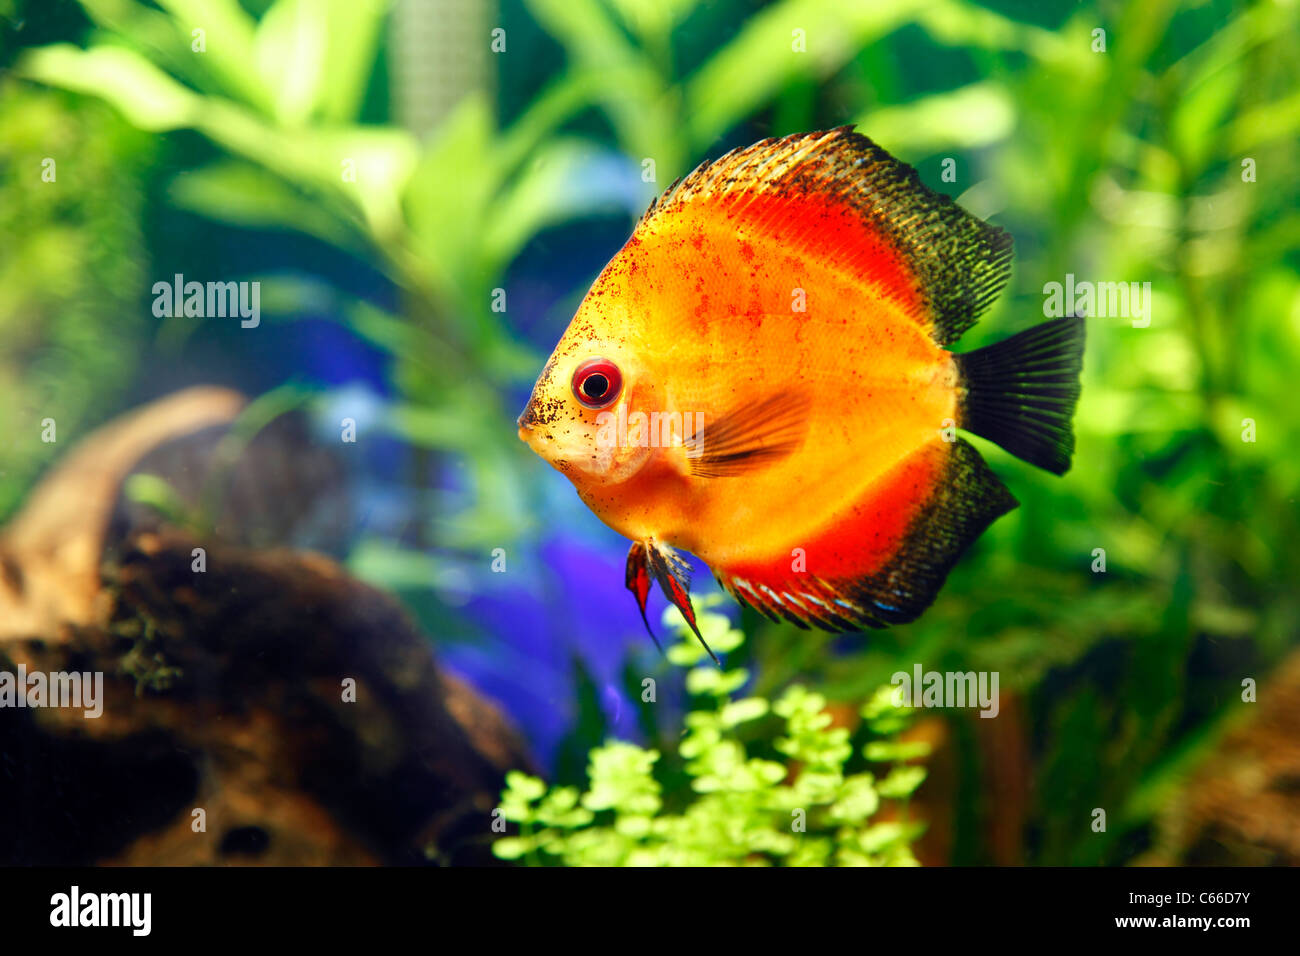 Fire Red Discus Fish Stock Photo